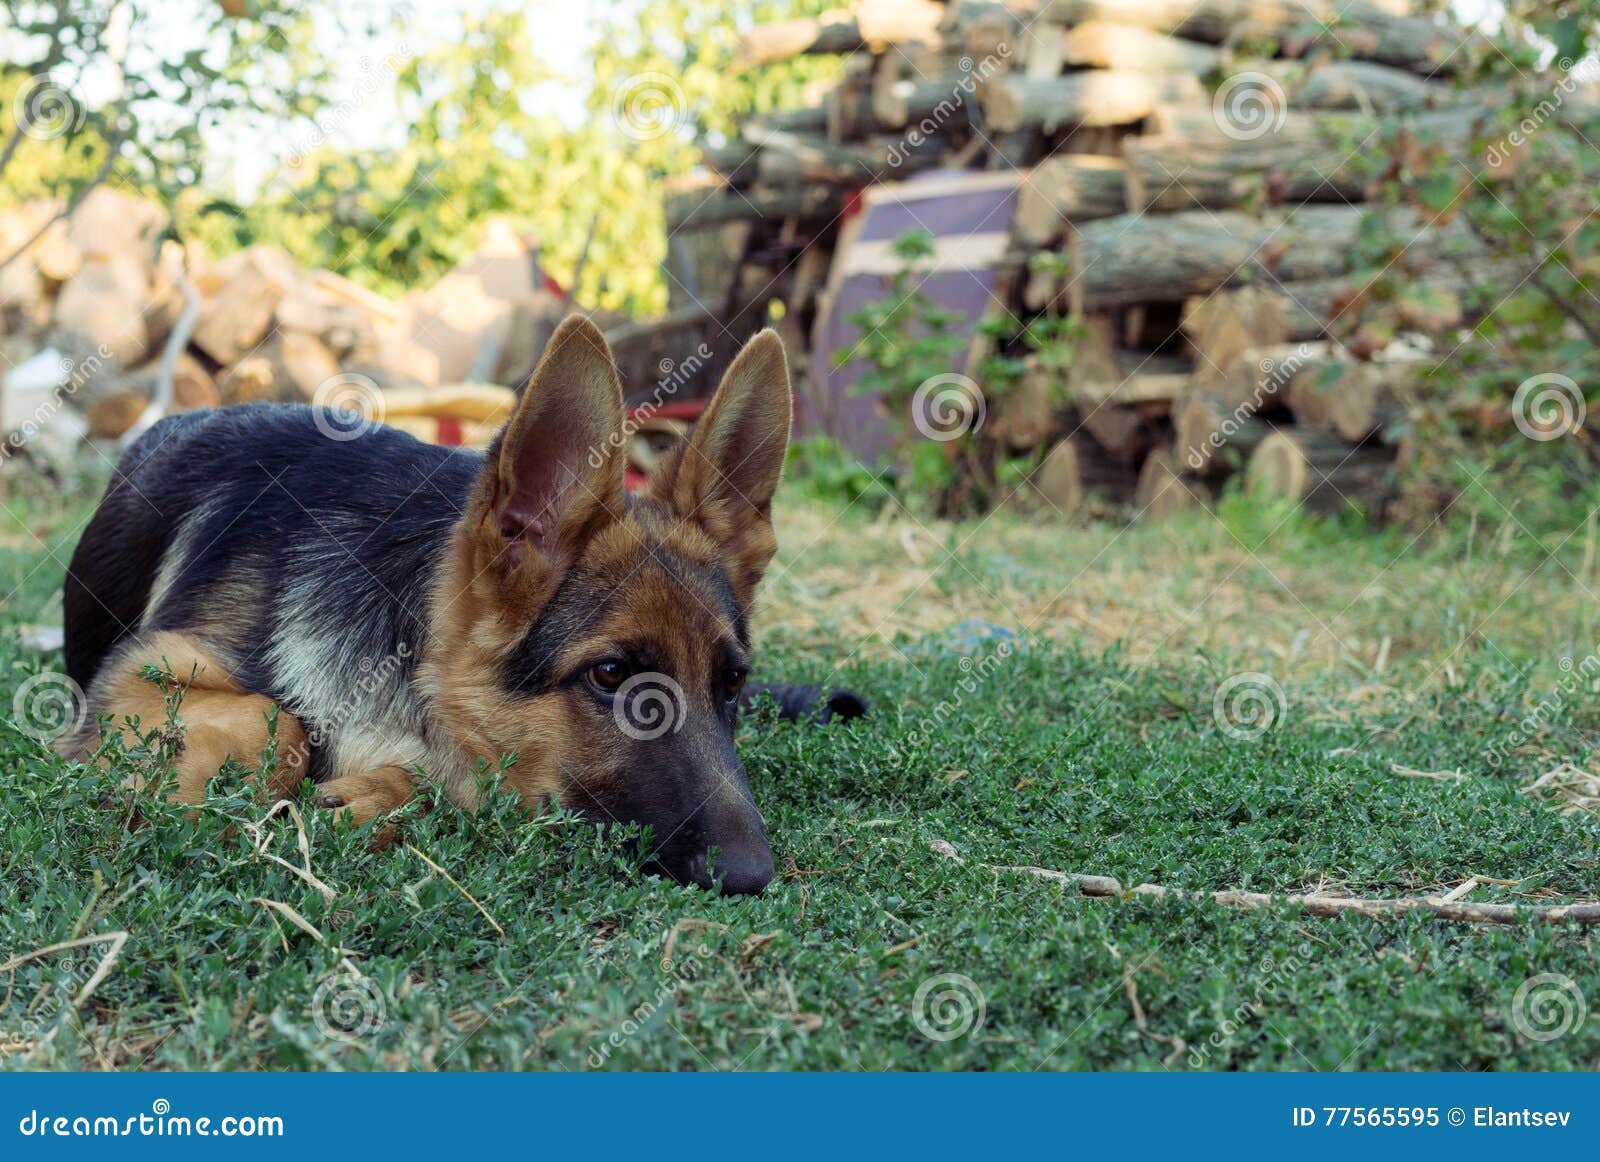 German Shepherd Dog Looking Aside and Lying on the Grass Waiting for ...